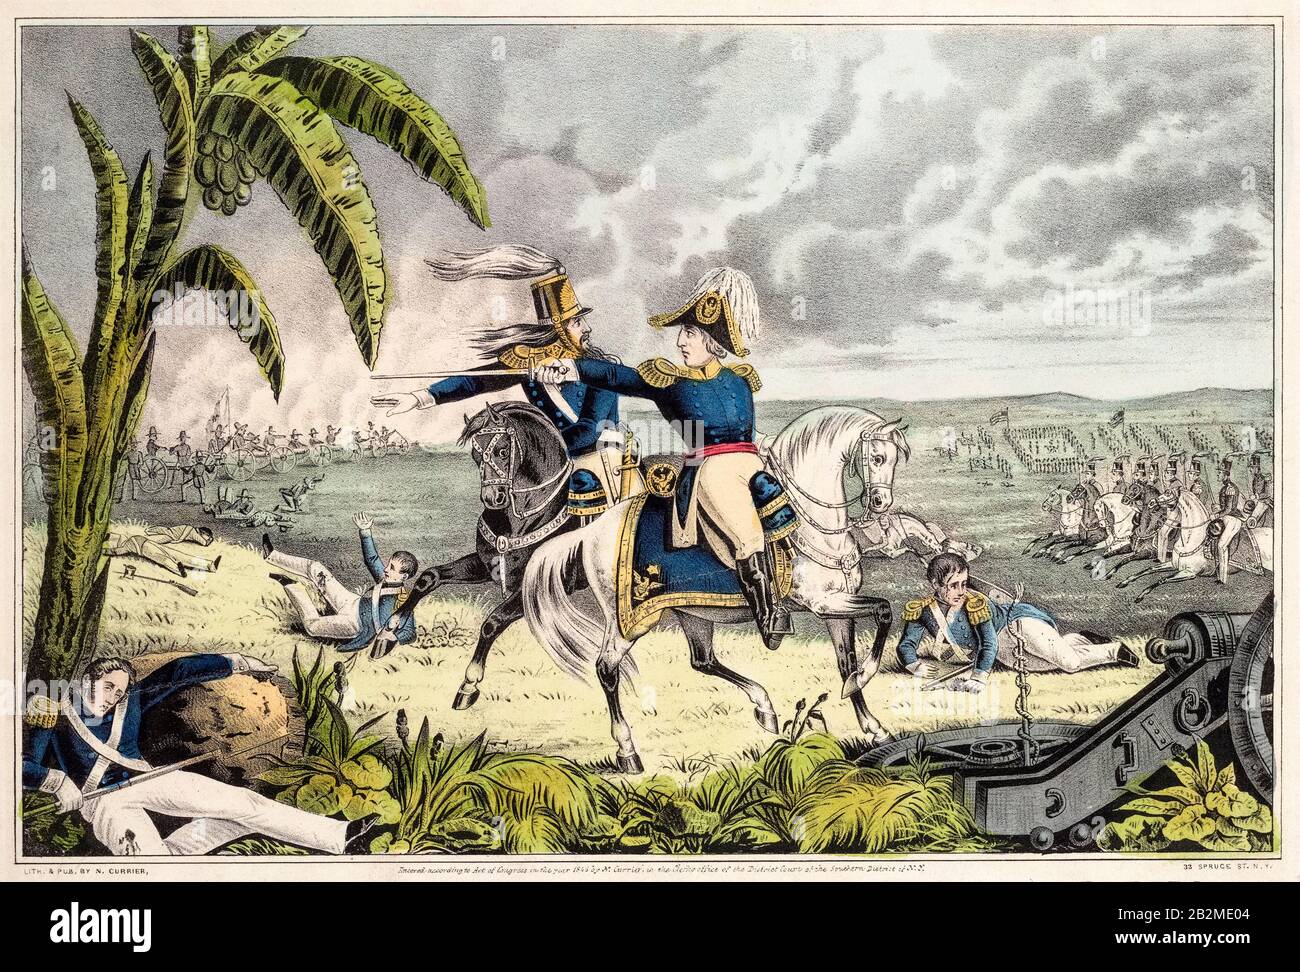 General Taylor at the Battle of Resaca de la Palma, May 9th 1846: Captain May Receiving His Orders to Charge the Mexican Batteries, print, 1846 Stock Photo